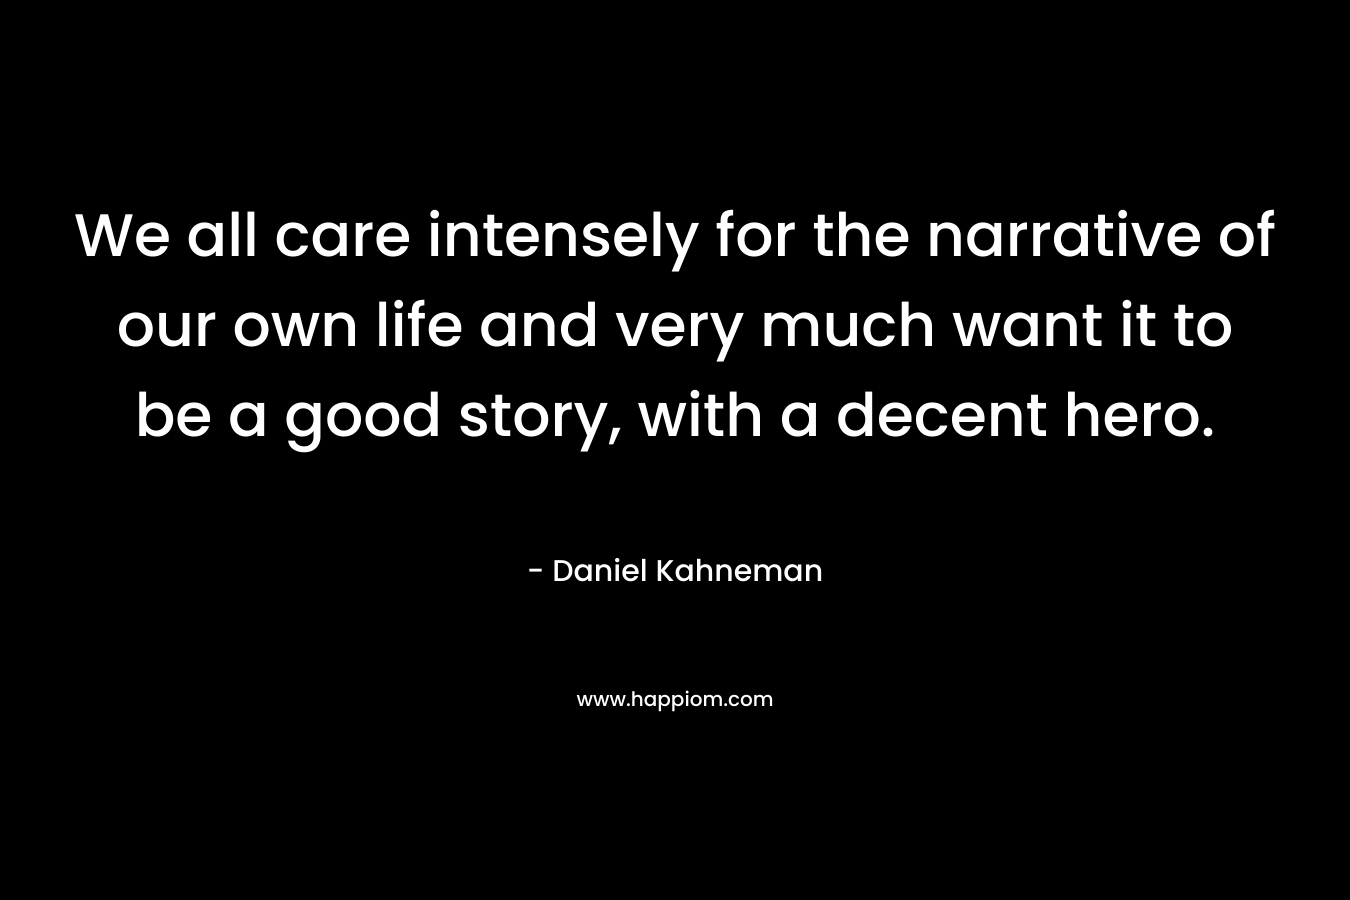 We all care intensely for the narrative of our own life and very much want it to be a good story, with a decent hero.